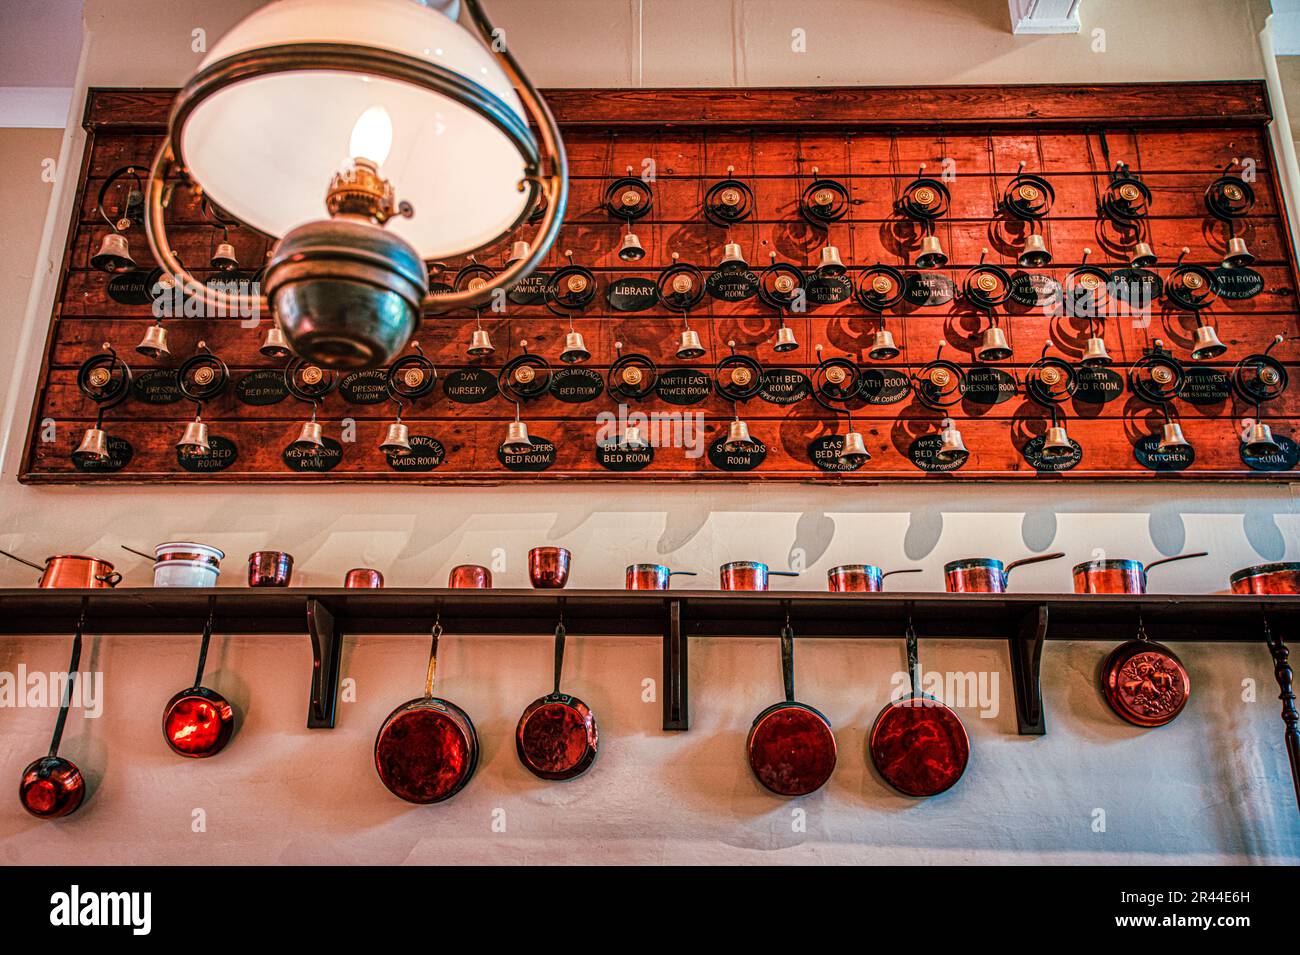 The bells, the bells. Servant bells in the kitchen at Palace House, Beaulieu, Hampshire, UK Stock Photo